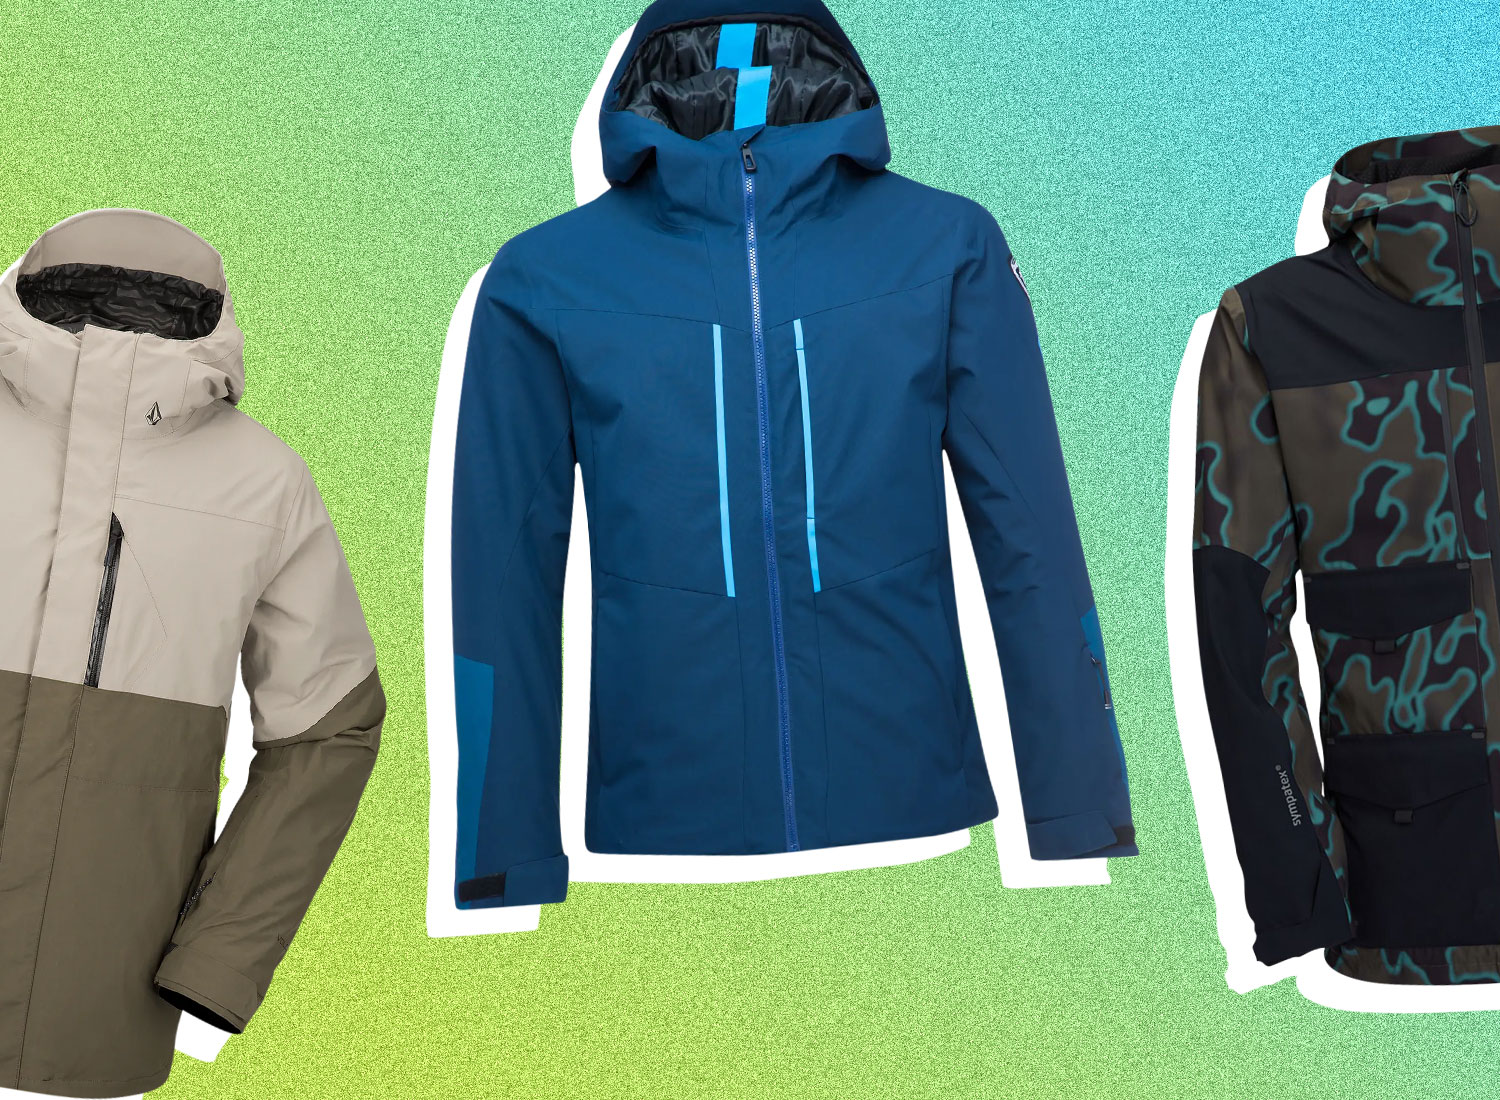 20 Best Snowboard Jackets To Shred In Style